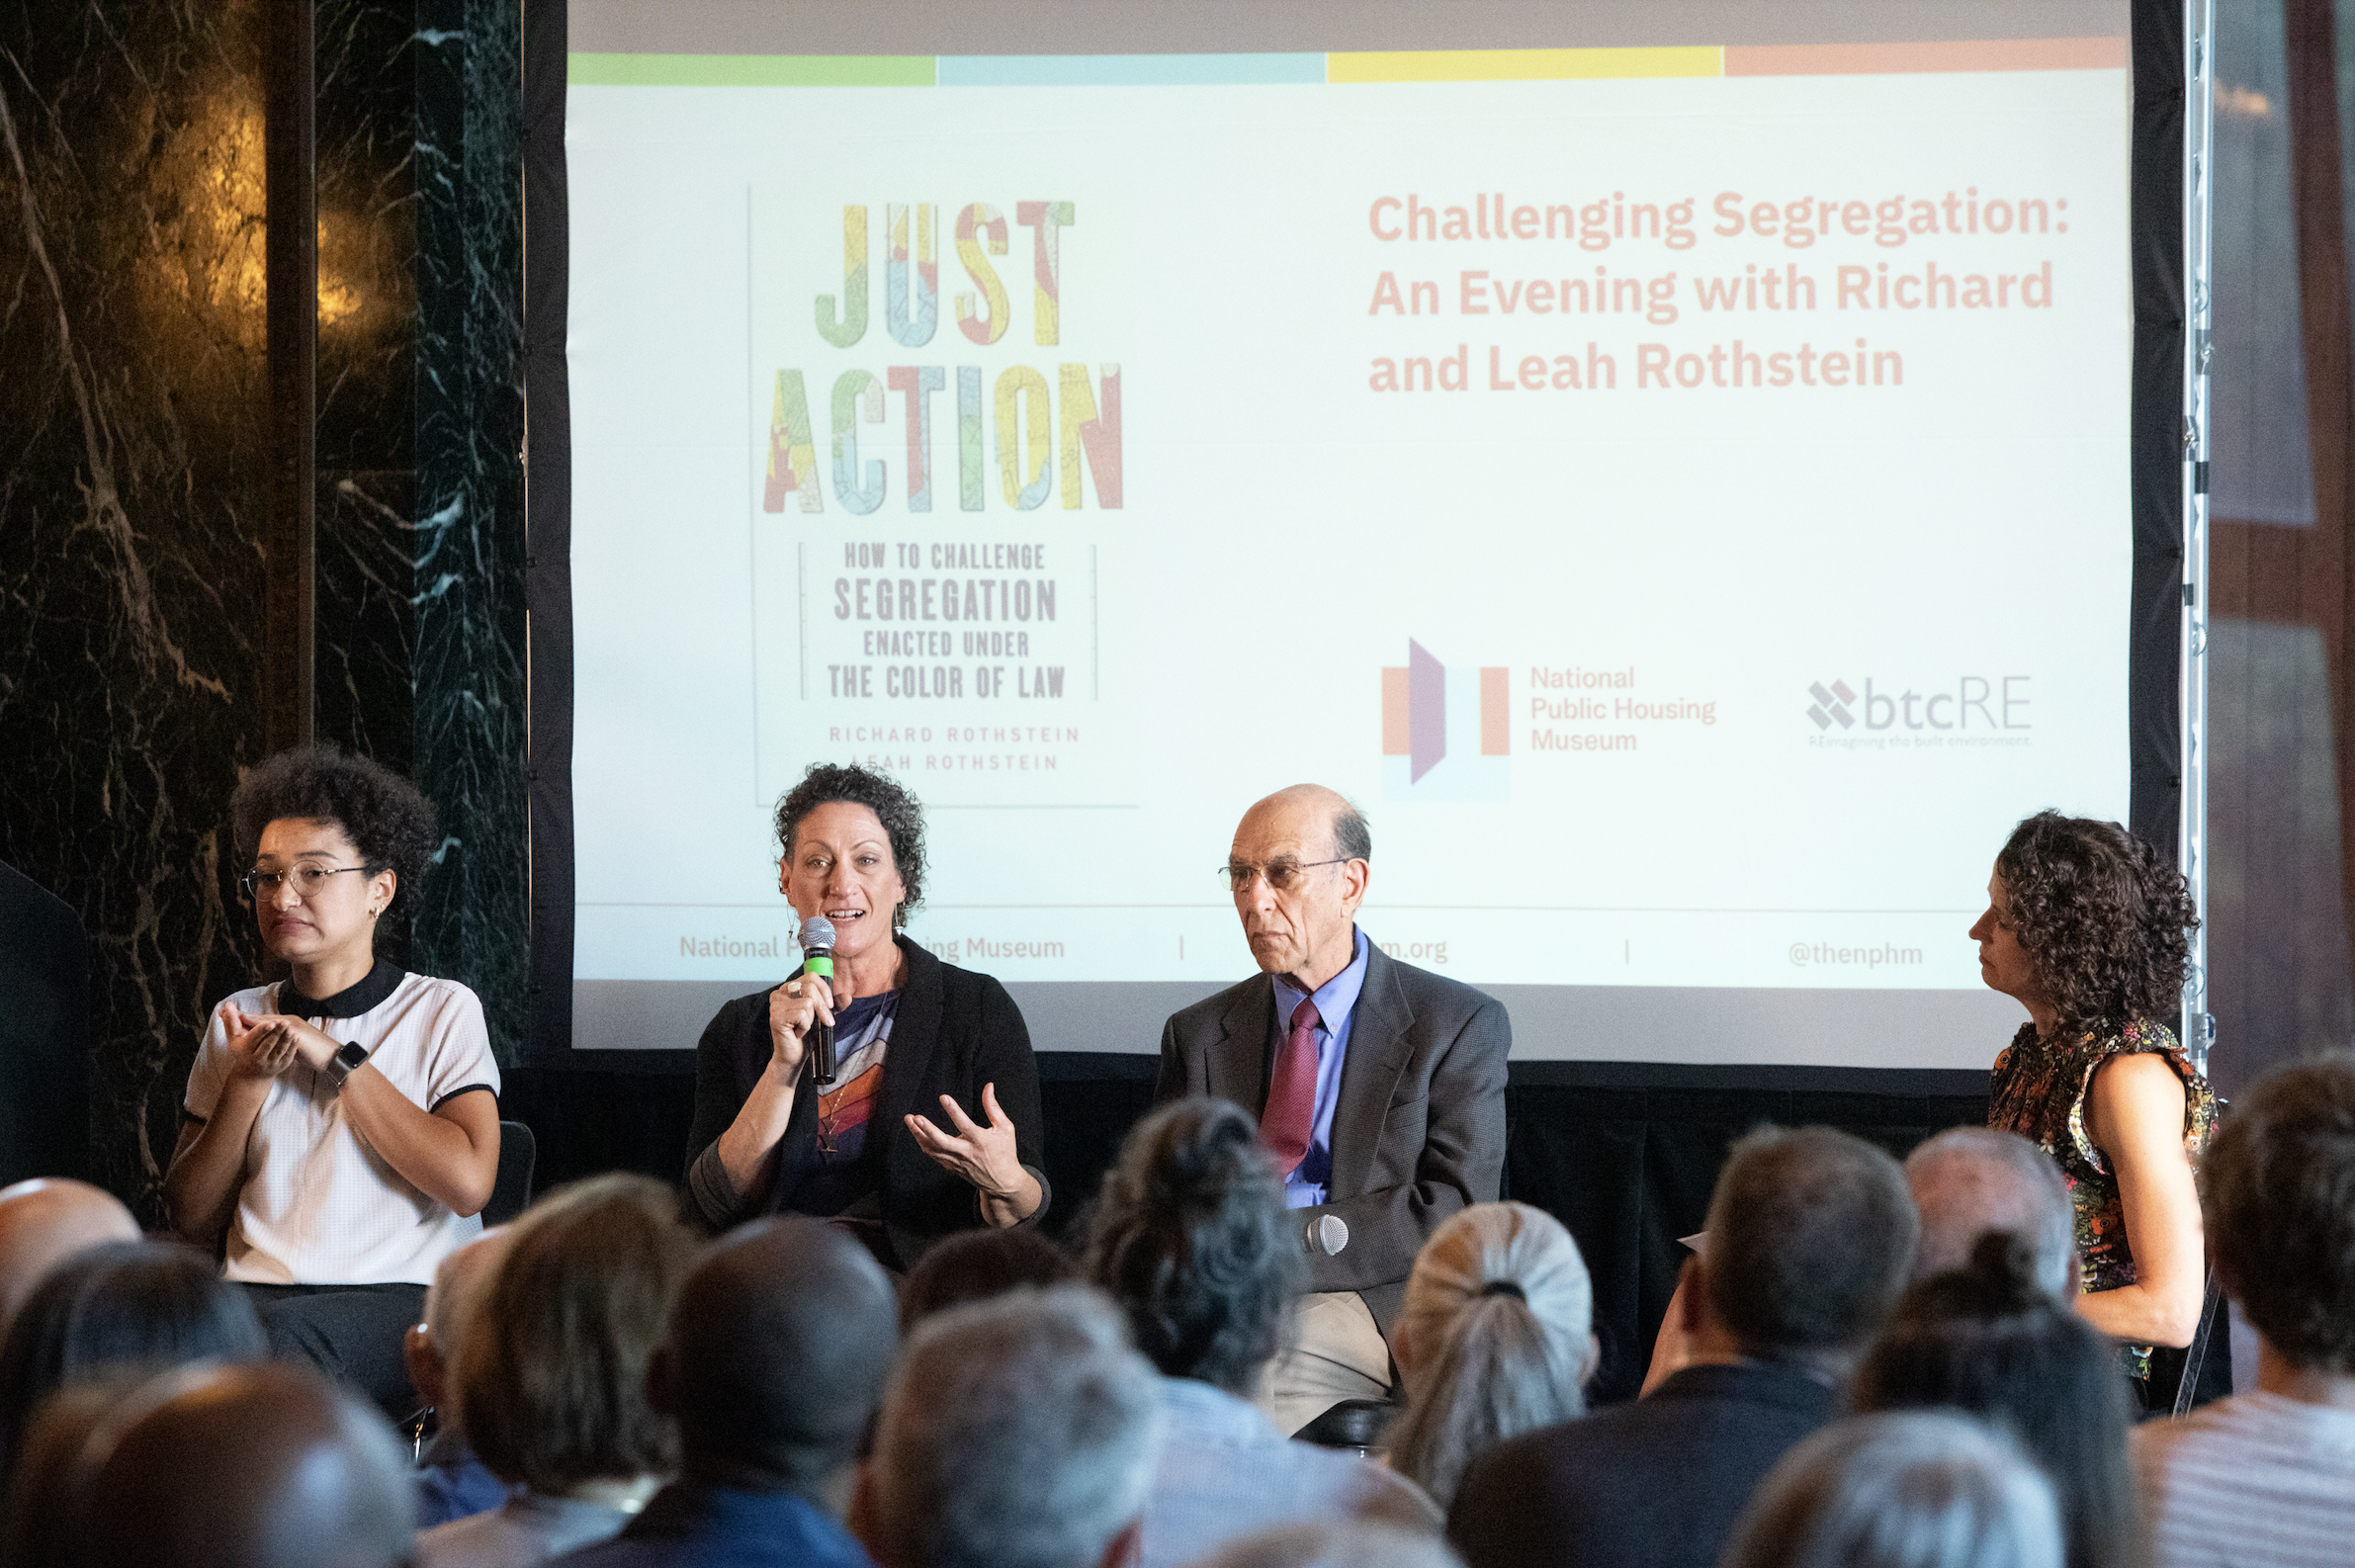  ASL interpreter Makeda Duncan, Leah Rothstein, Richard Rothstein, and Marisa Novara sit in a row in front of a screen. The screen has a photo of the book “Just Action” on it along with logos for the National Public Housing Museum and btcRE.  